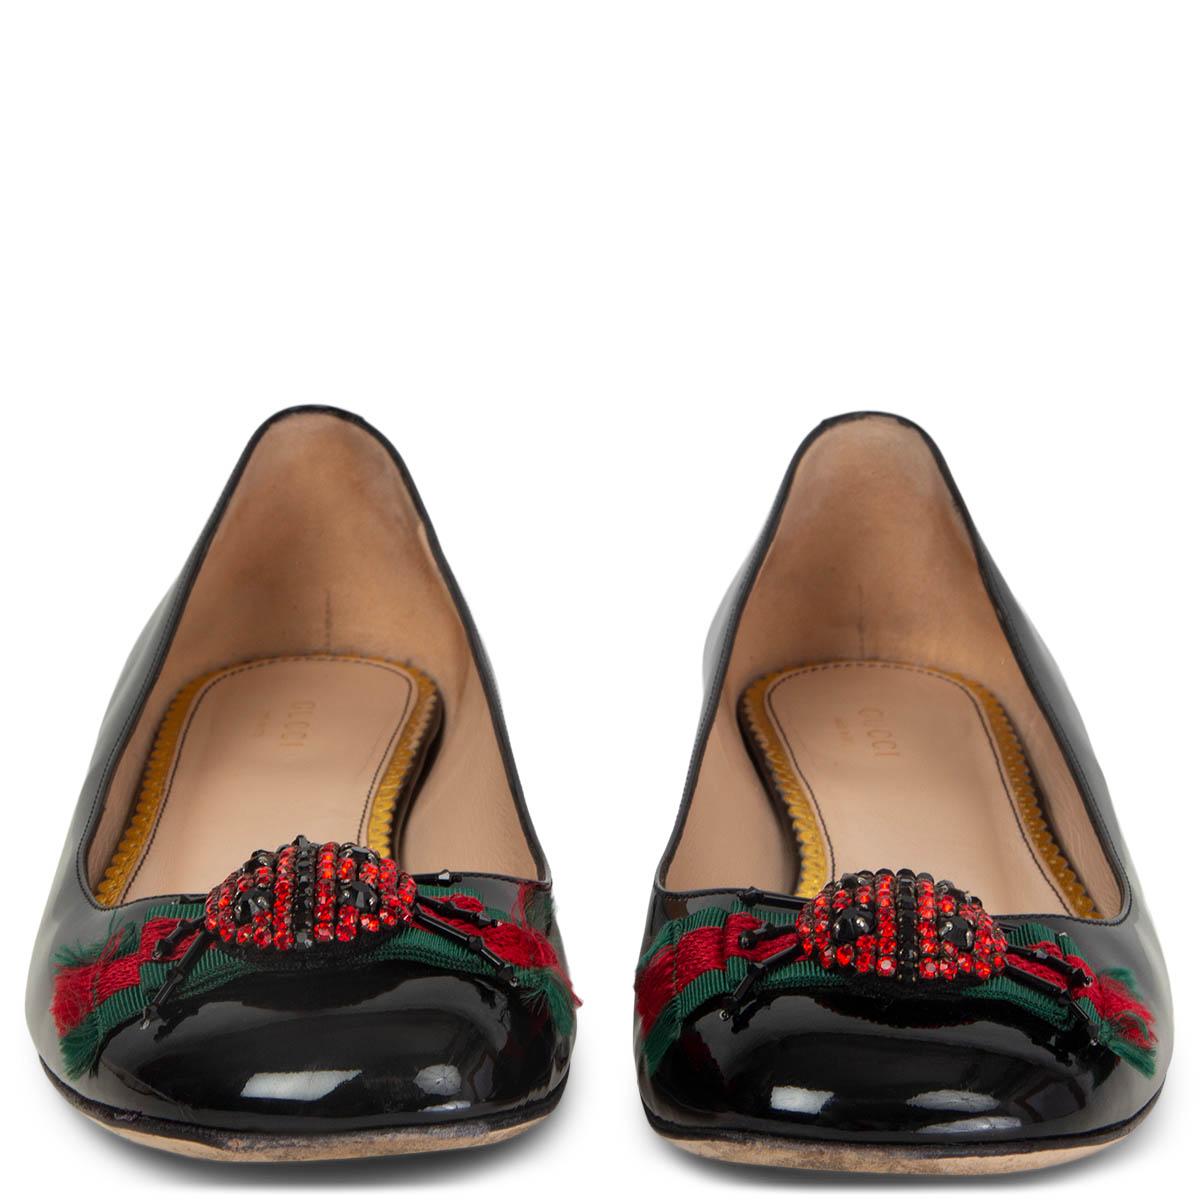 100% authentic Gucci 2016 Lexi Ladybug Embellished Ballet Flats in black patent leather featuring signature red & green grosgrain bow and crystal encrusted embroidered ladybug. Have been worn with a lot of wear to the soles. Overall in excellent